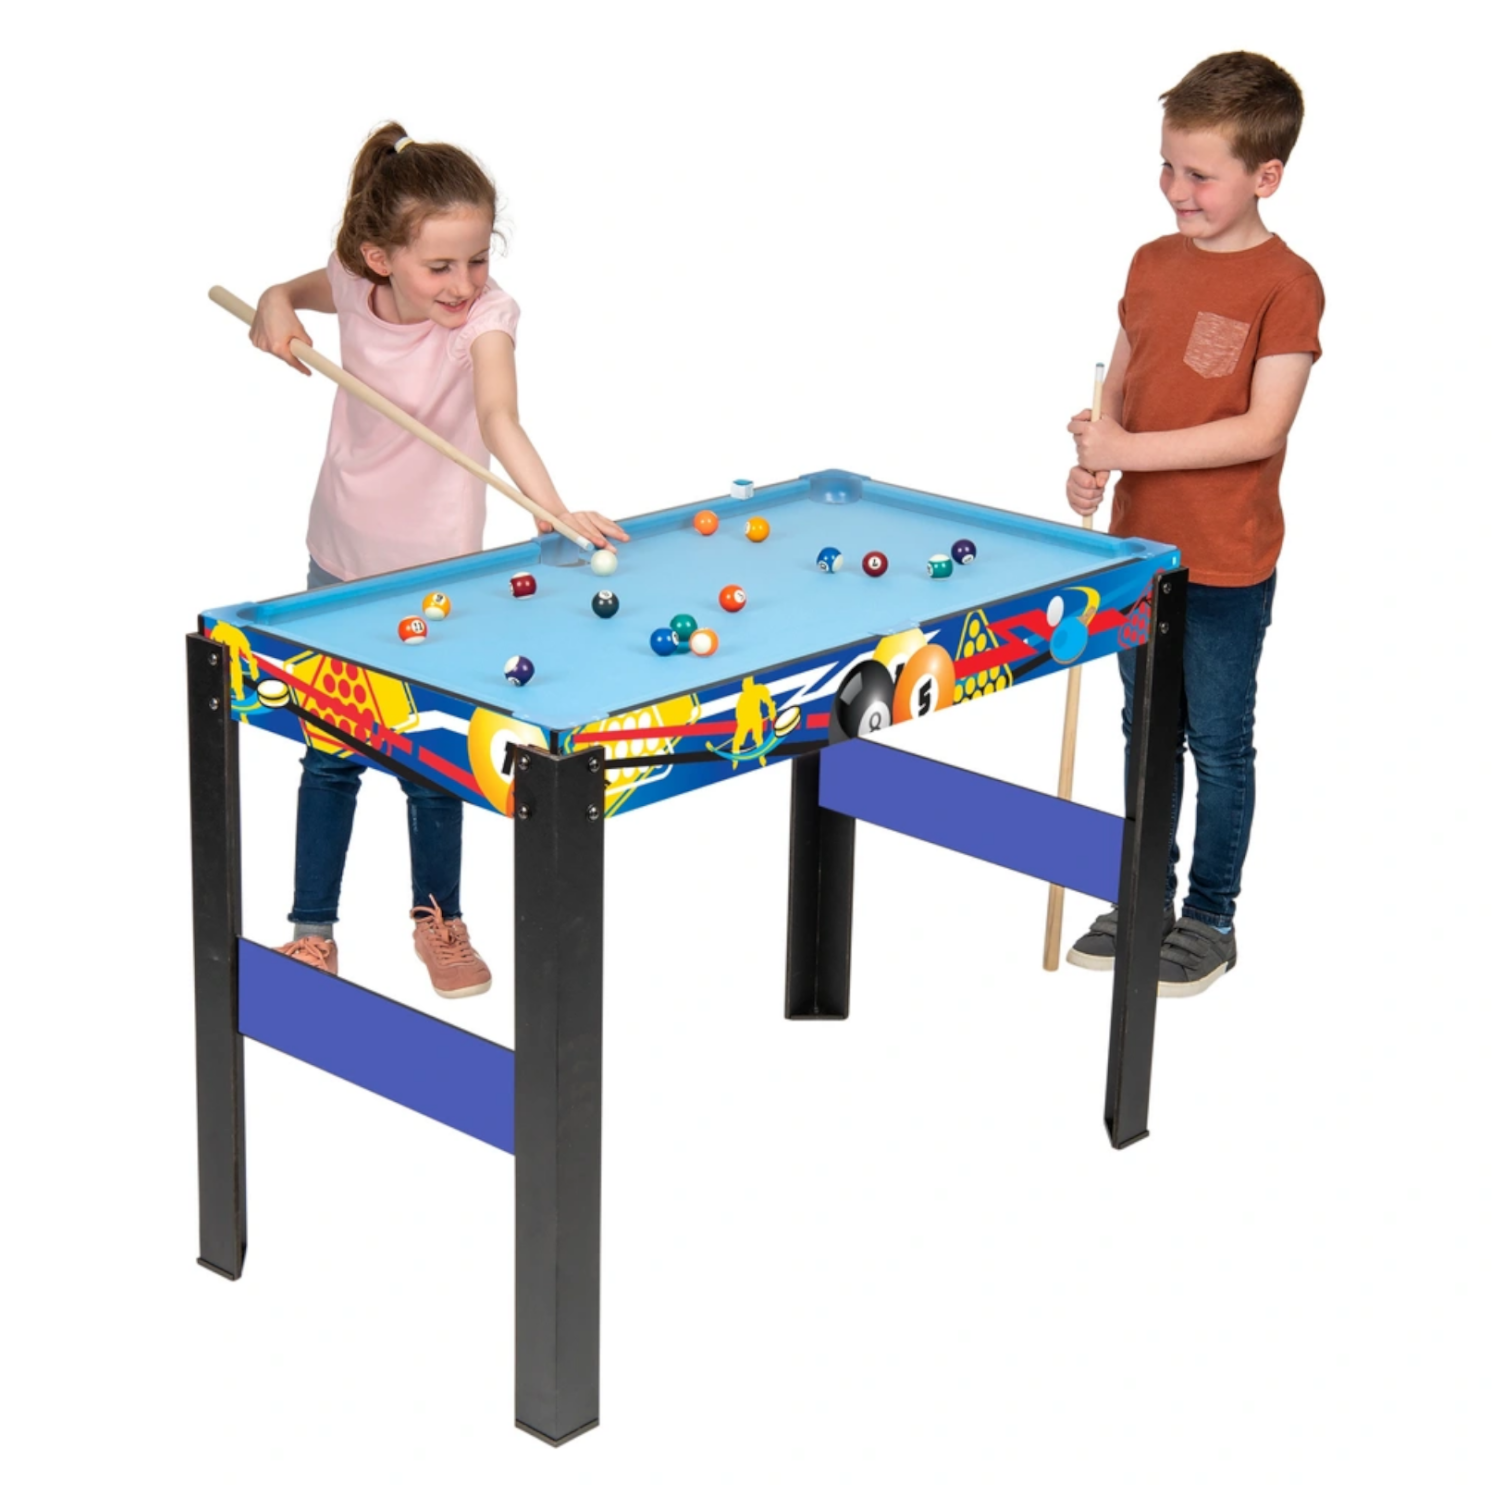 4FT 12IN1 Multi Game Table | Kids Entertainment